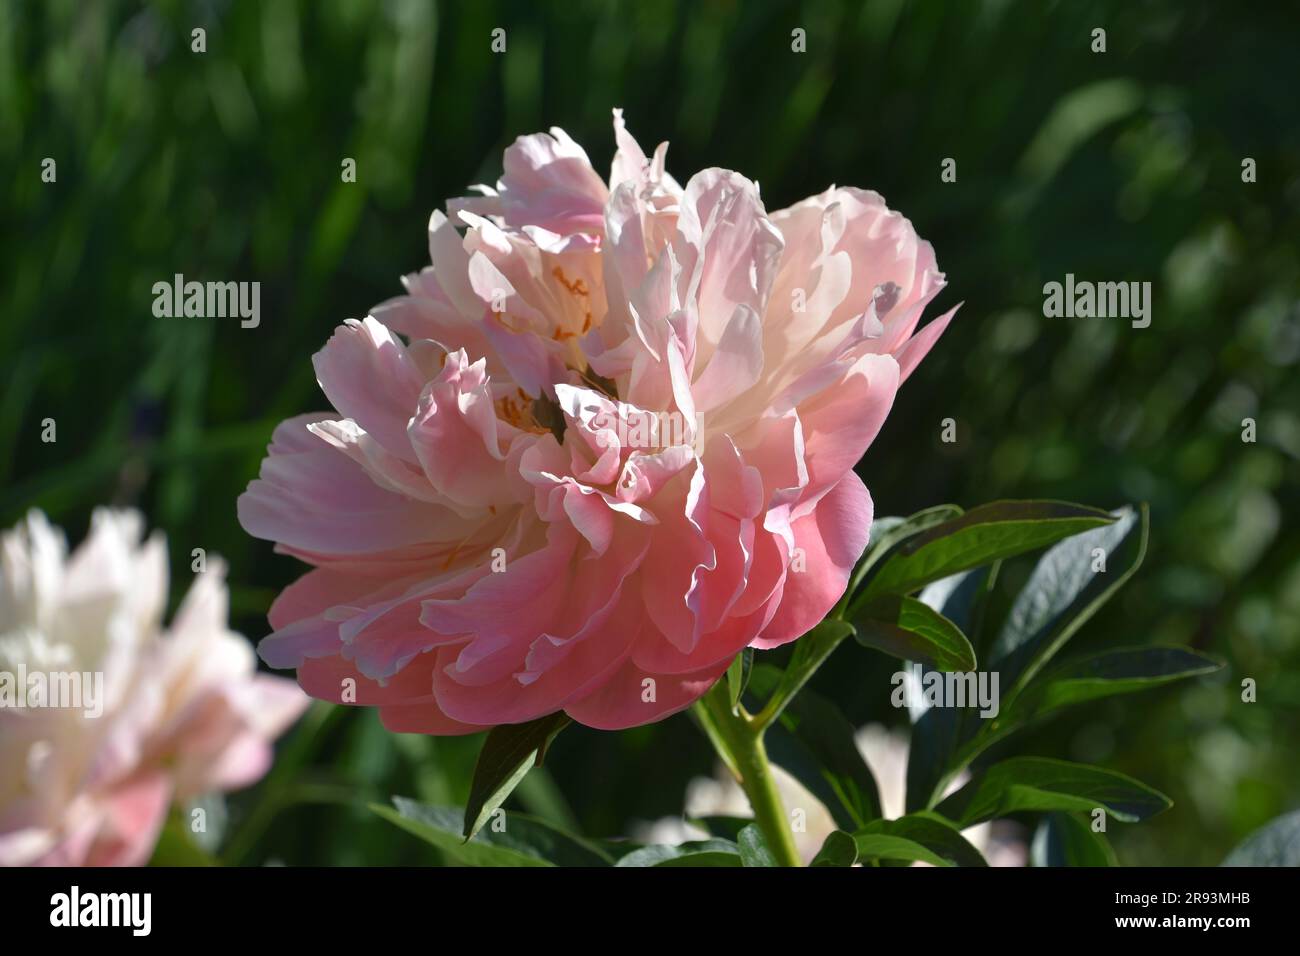 pink flower salt peony essential oil for spa and aromatherapy